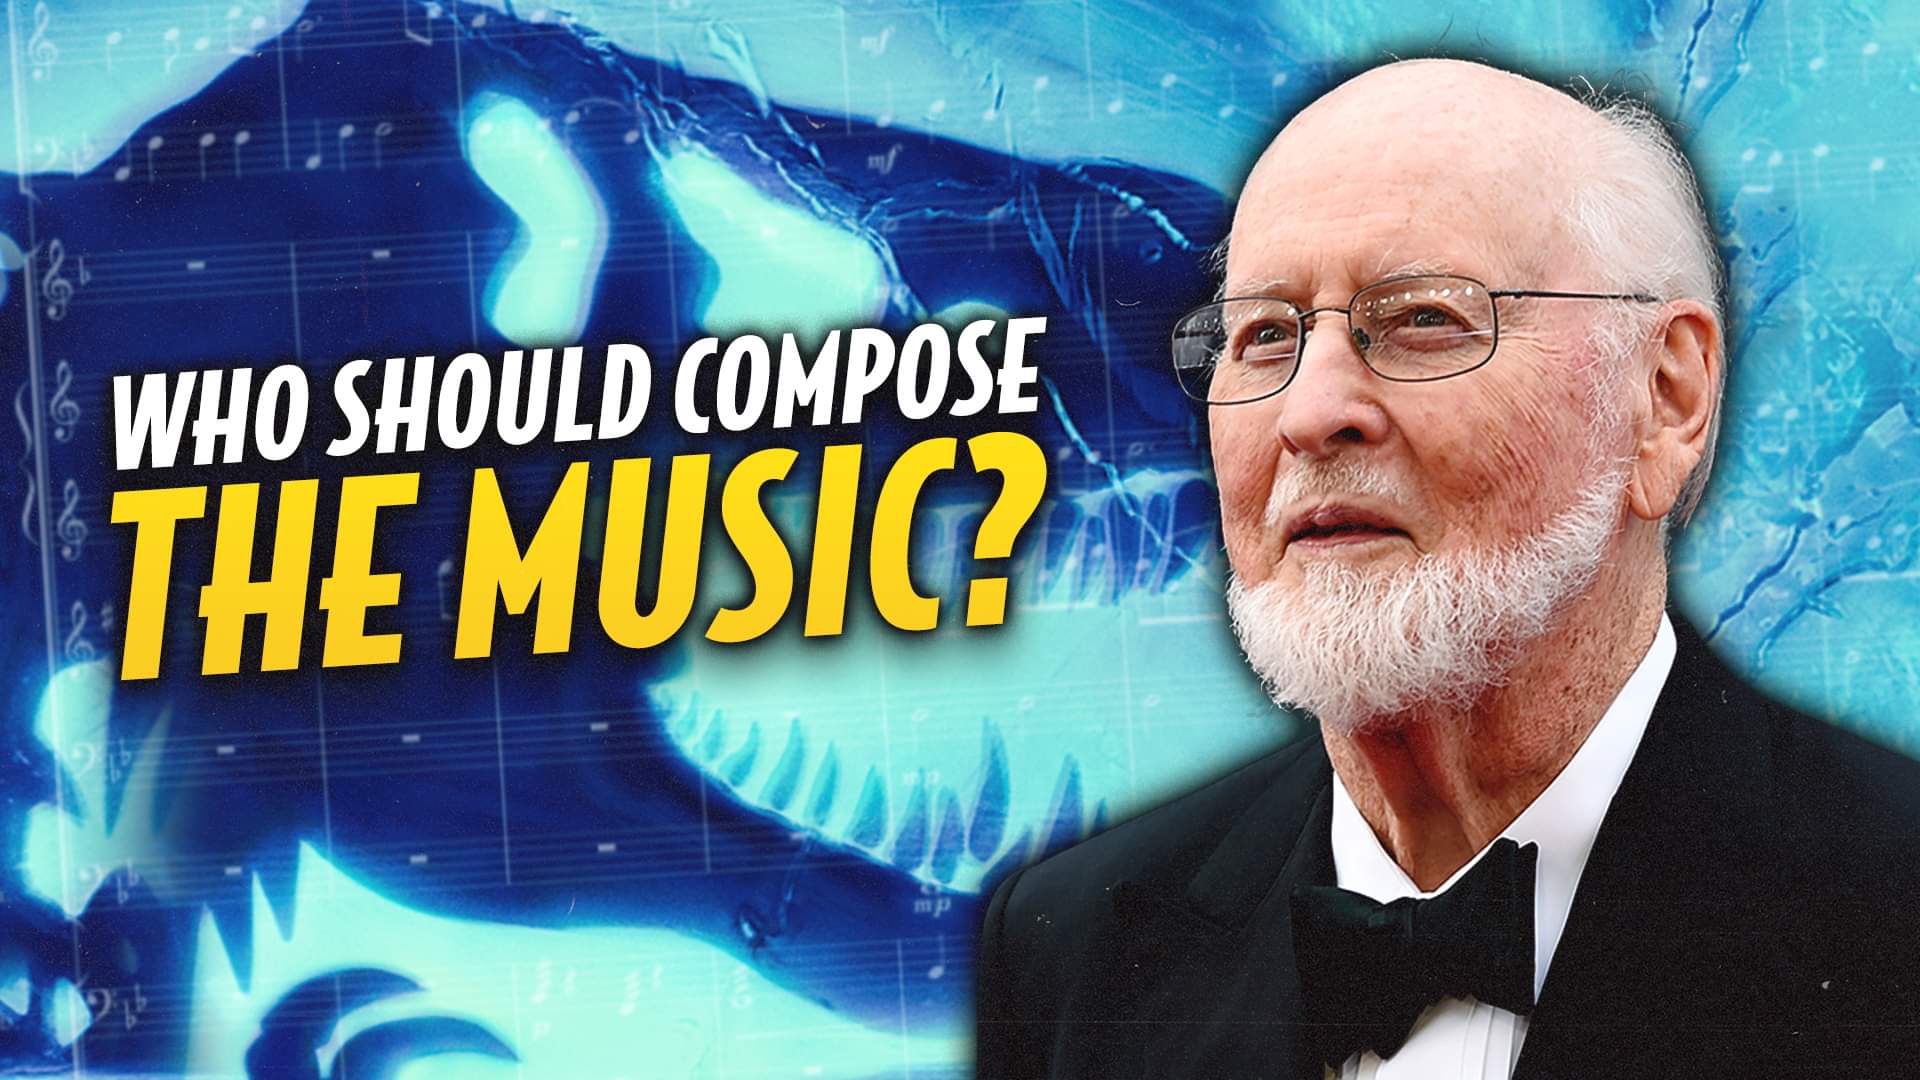 Who Should Compose the Music for Jurassic World 4?